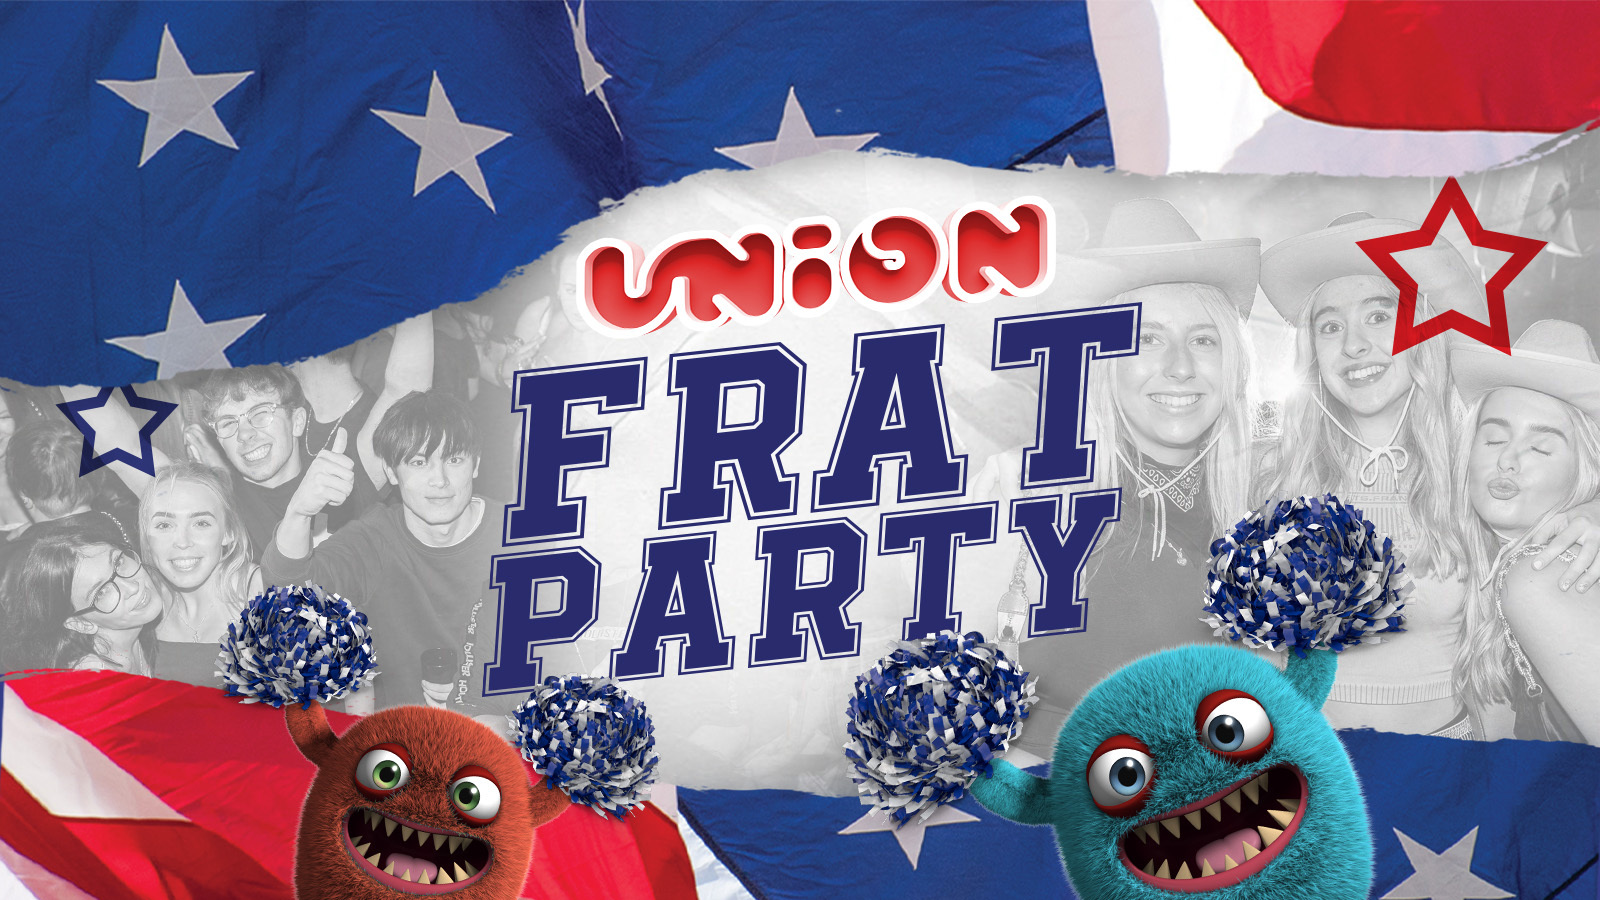 UNION TUESDAY’S PRESENT THE REFRESHERS FRAT PARTY